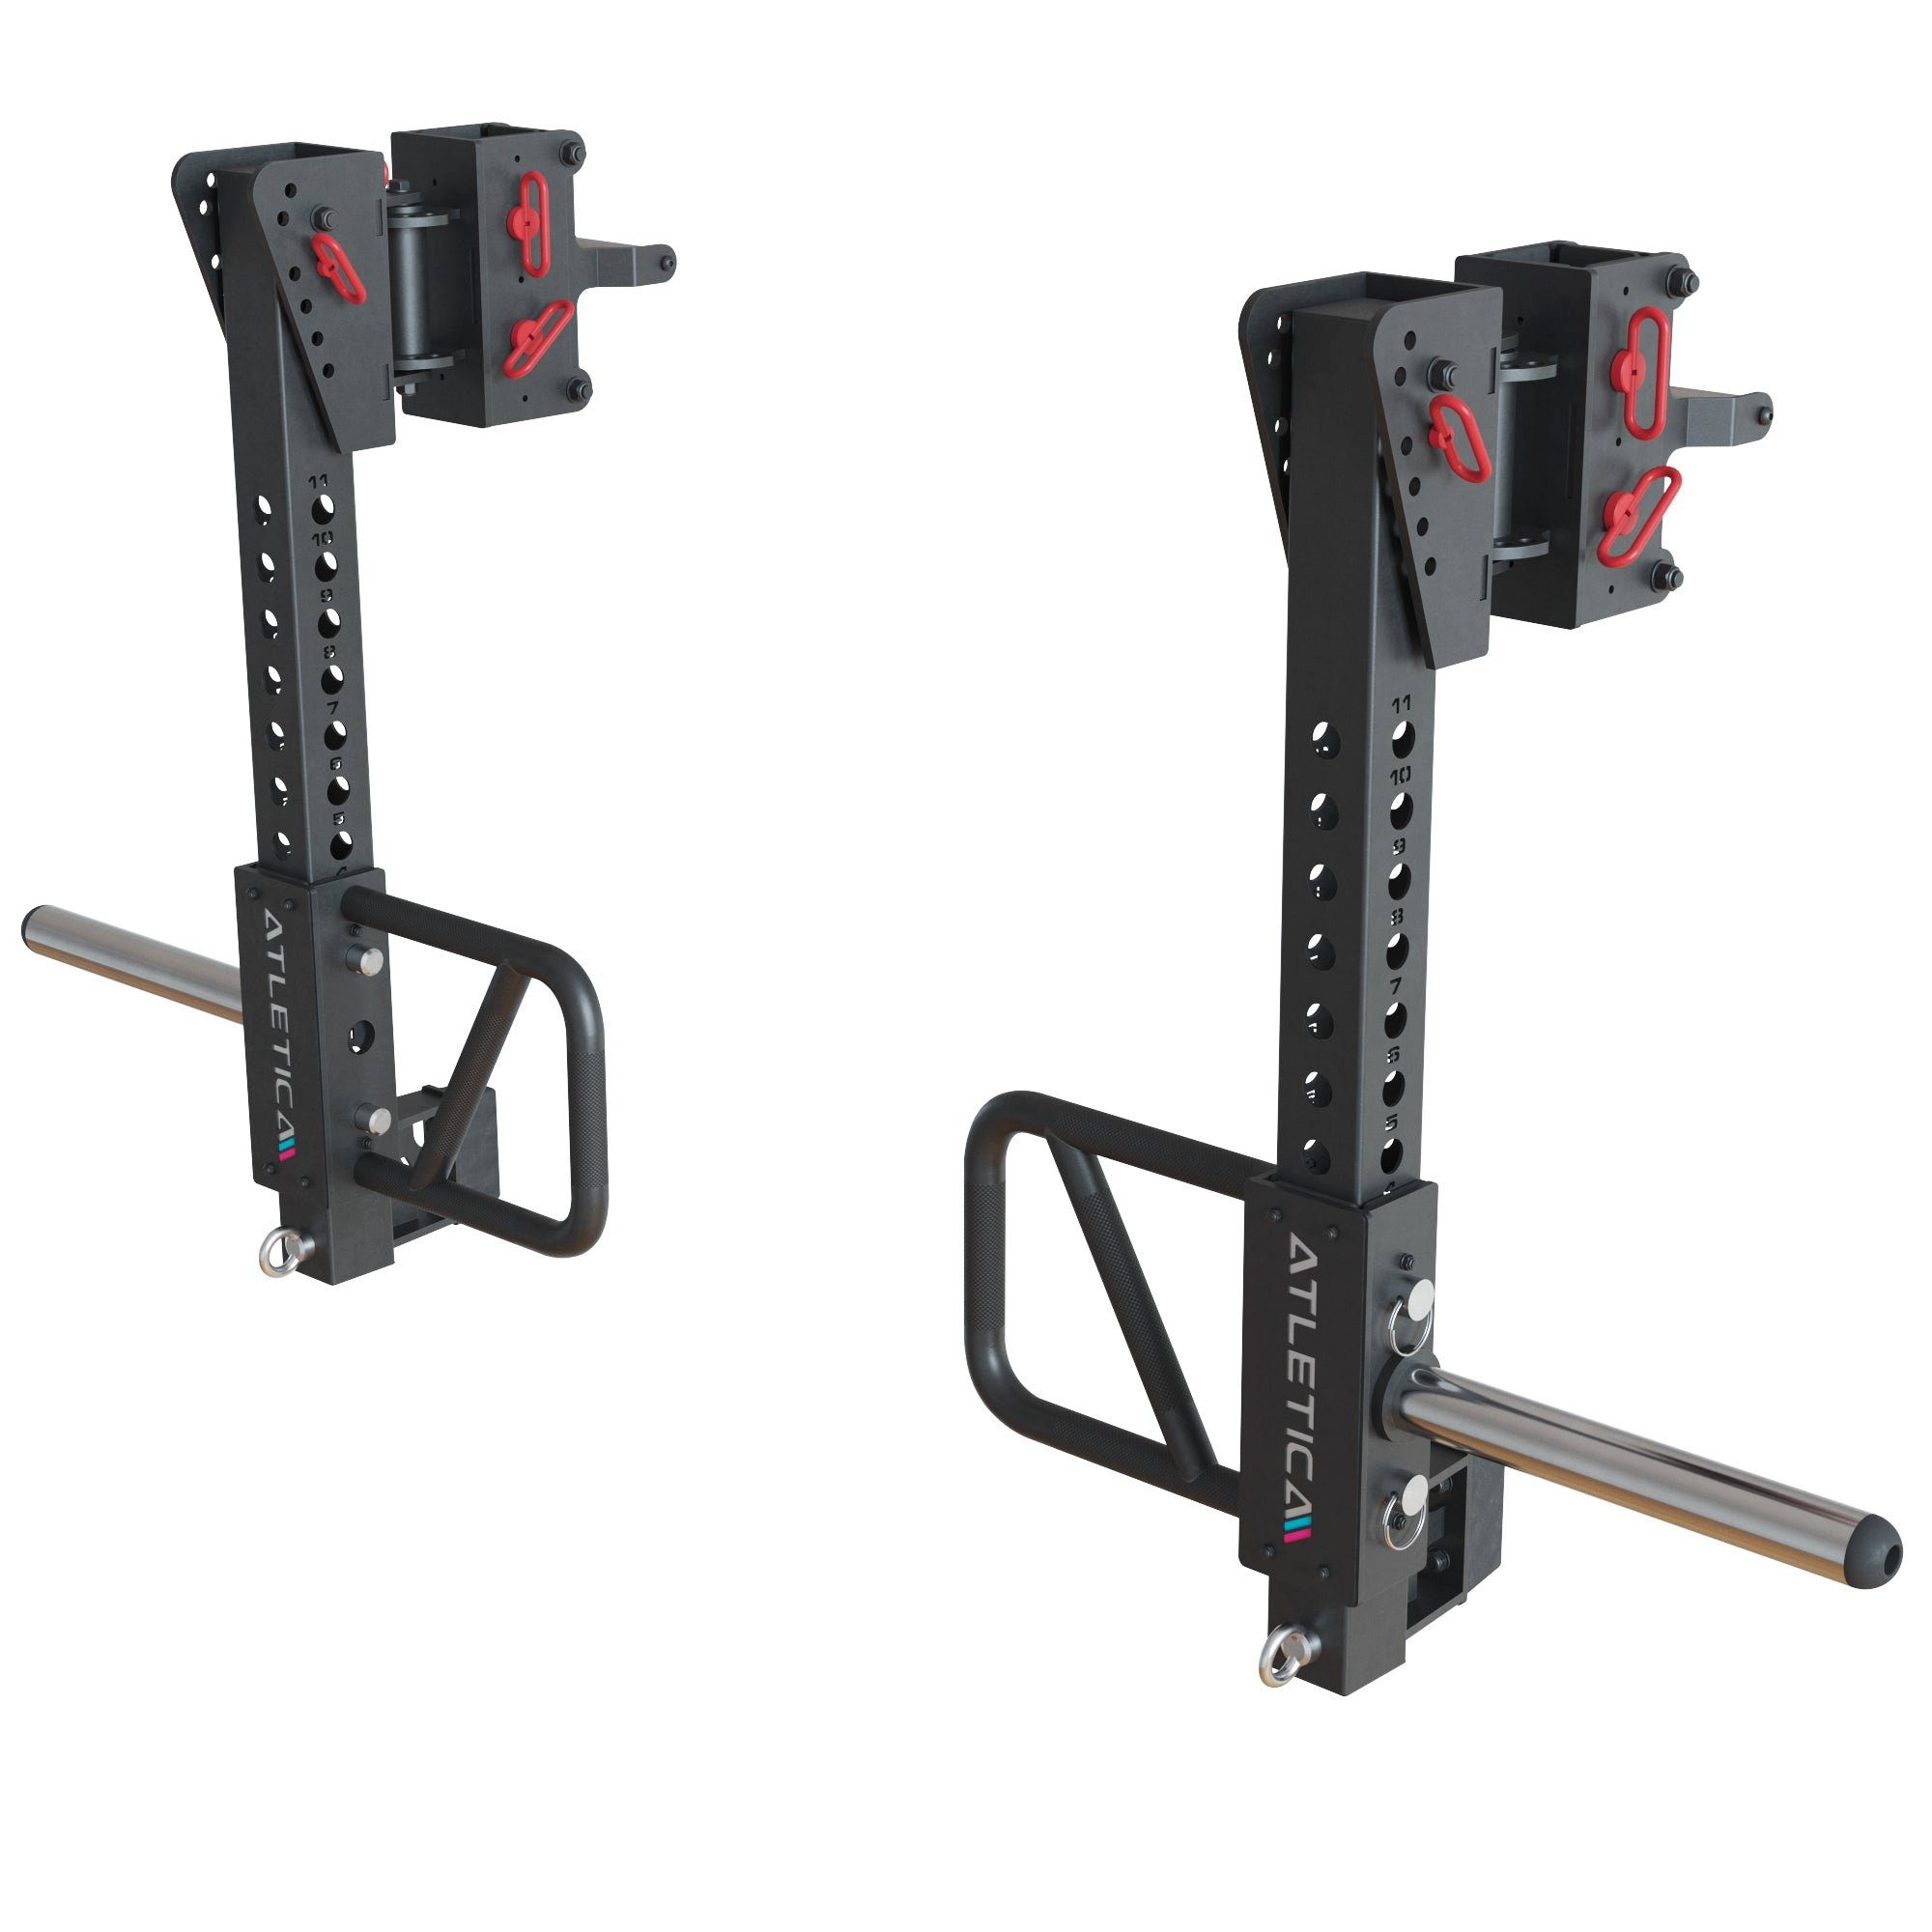 ATLETICA Power Rack R8-Jammer Arms, 75x75x3 54 Stahlprofil, mm kg, 110 cm